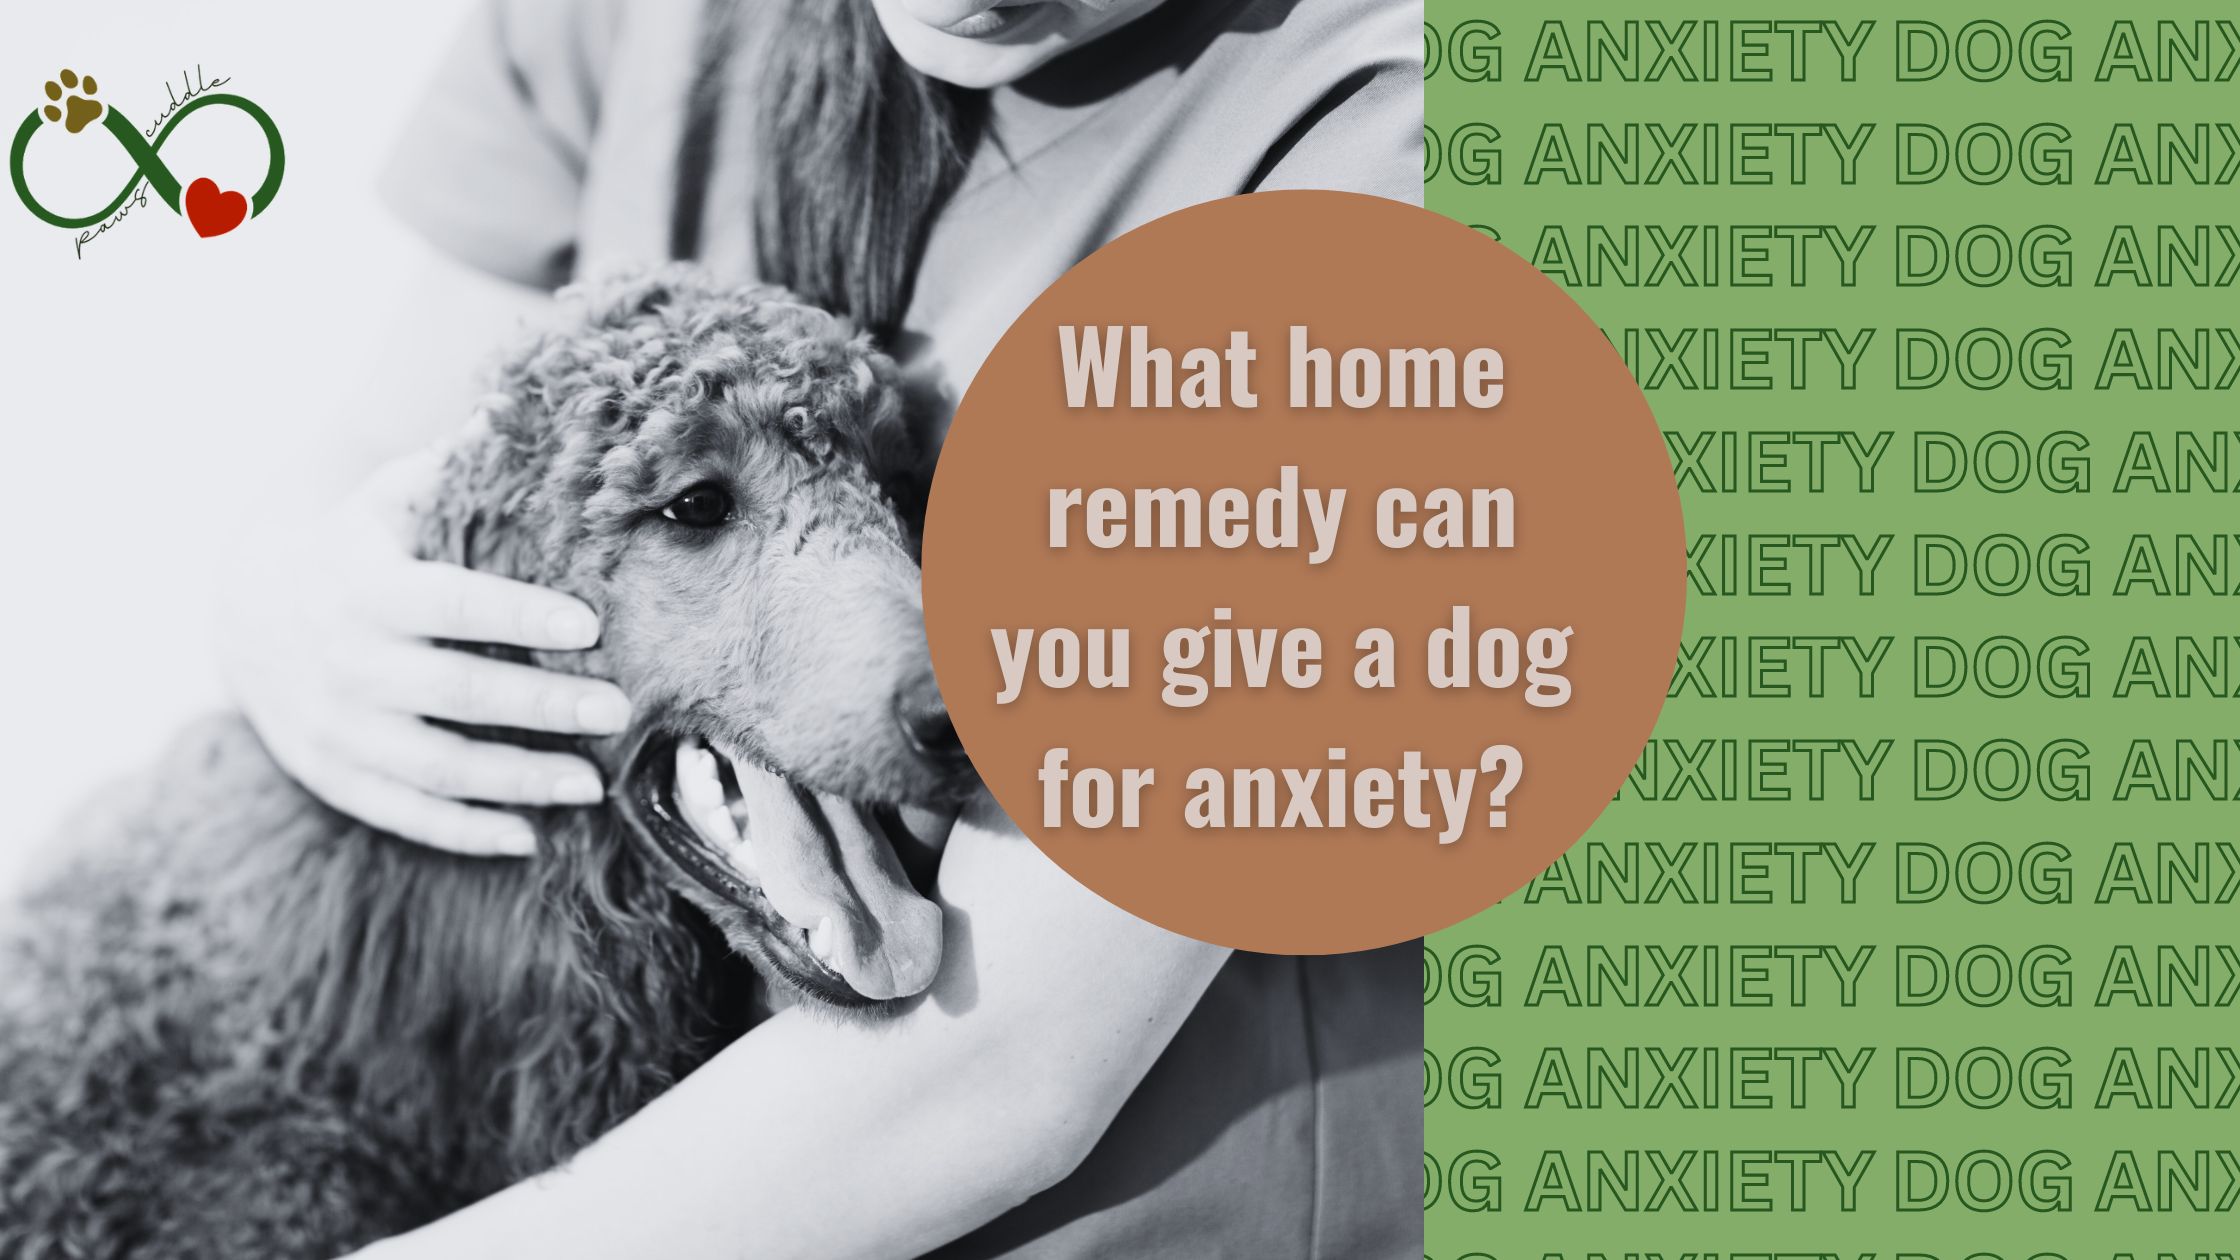 What home remedy can you give a dog for anxiety?